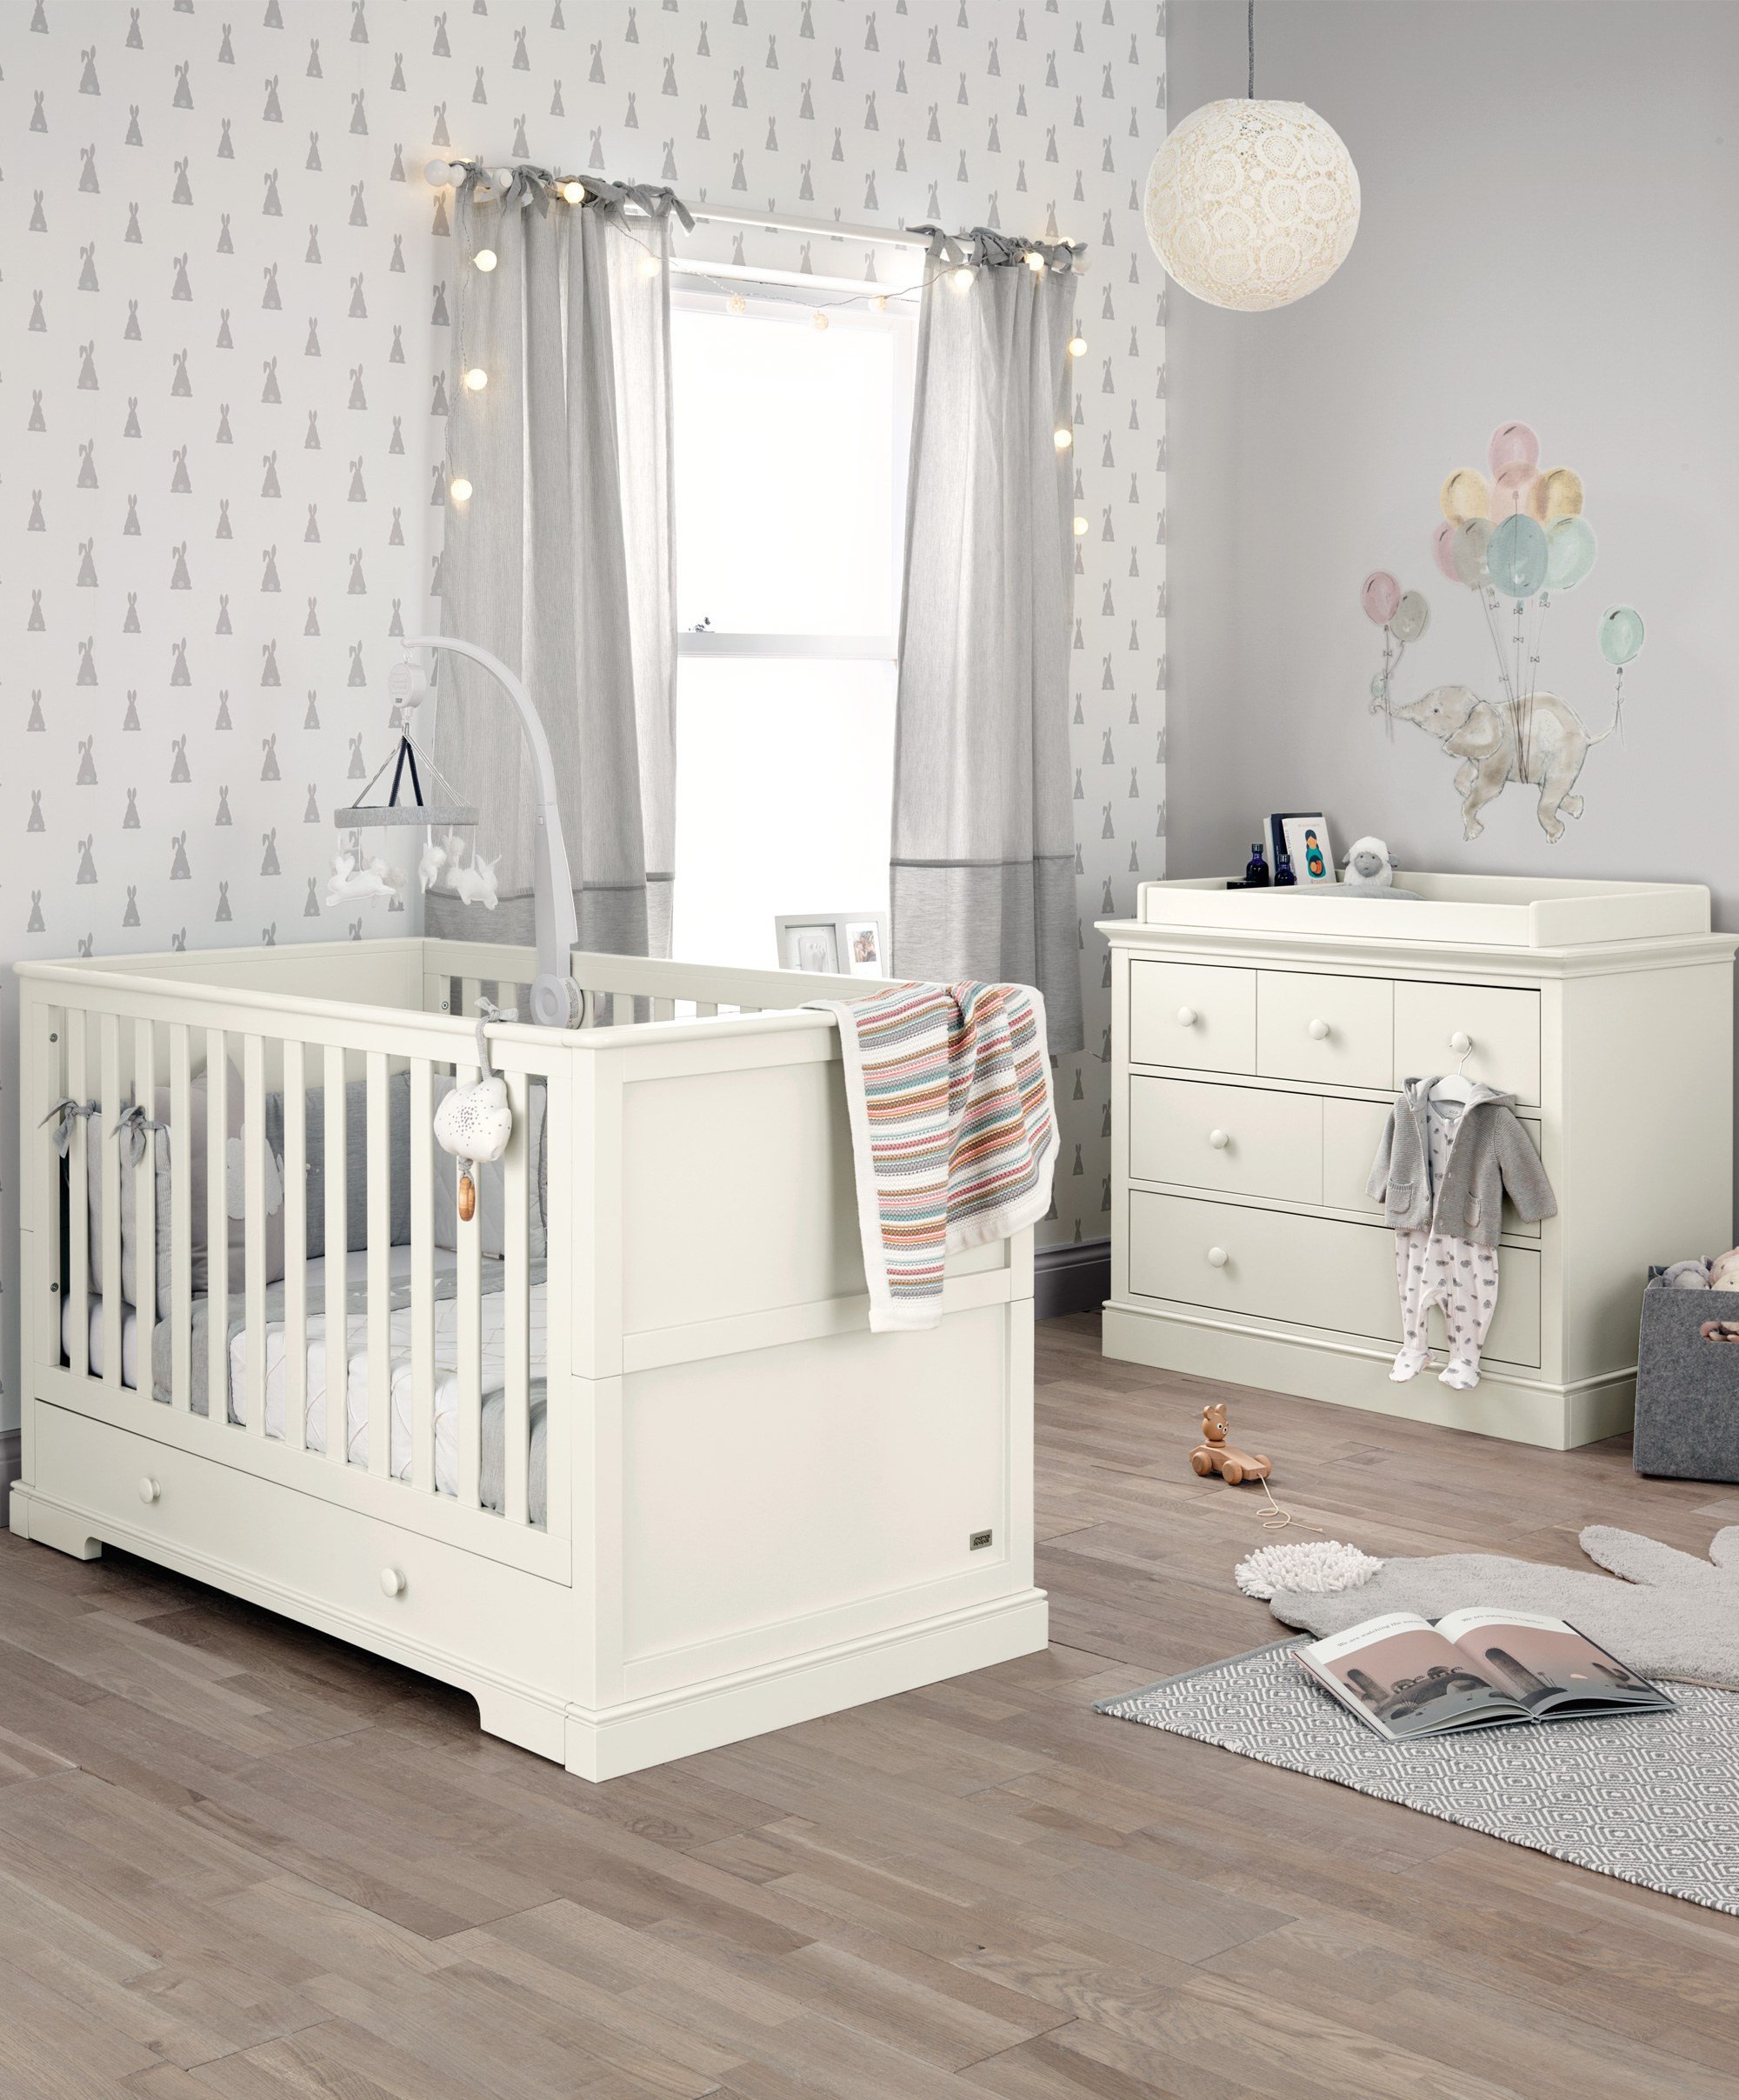 White Dressers For Baby Room
 Oxford Wooden Adjustable Cot Bed & Dresser Nursery